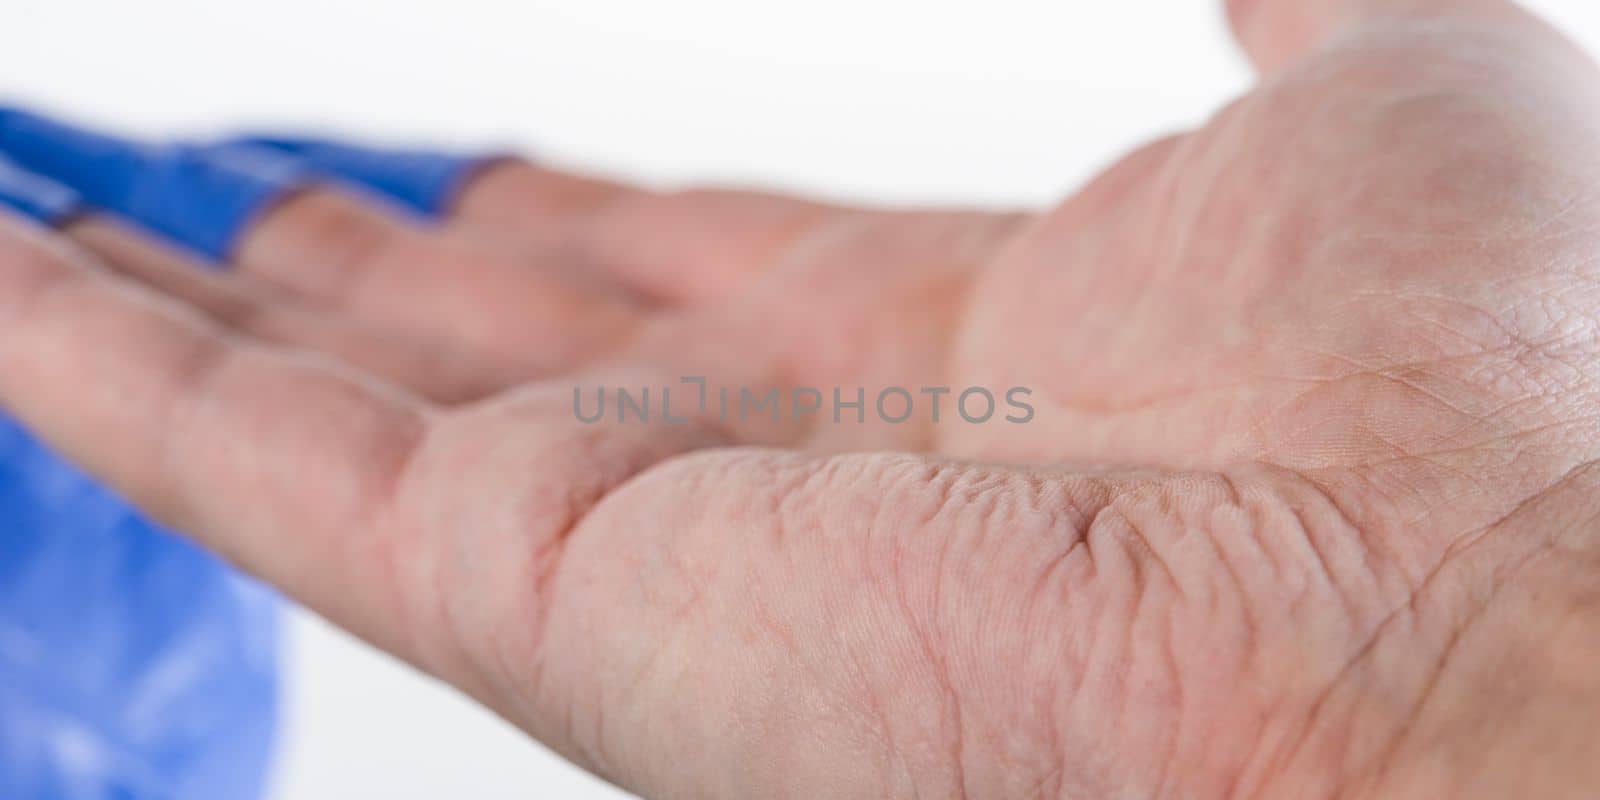 The doctor takes off his blue rubber gloves, the skin on his hands is wrinkled from moisture. Wrinkled fingers after wearing rubber gloves for a long time